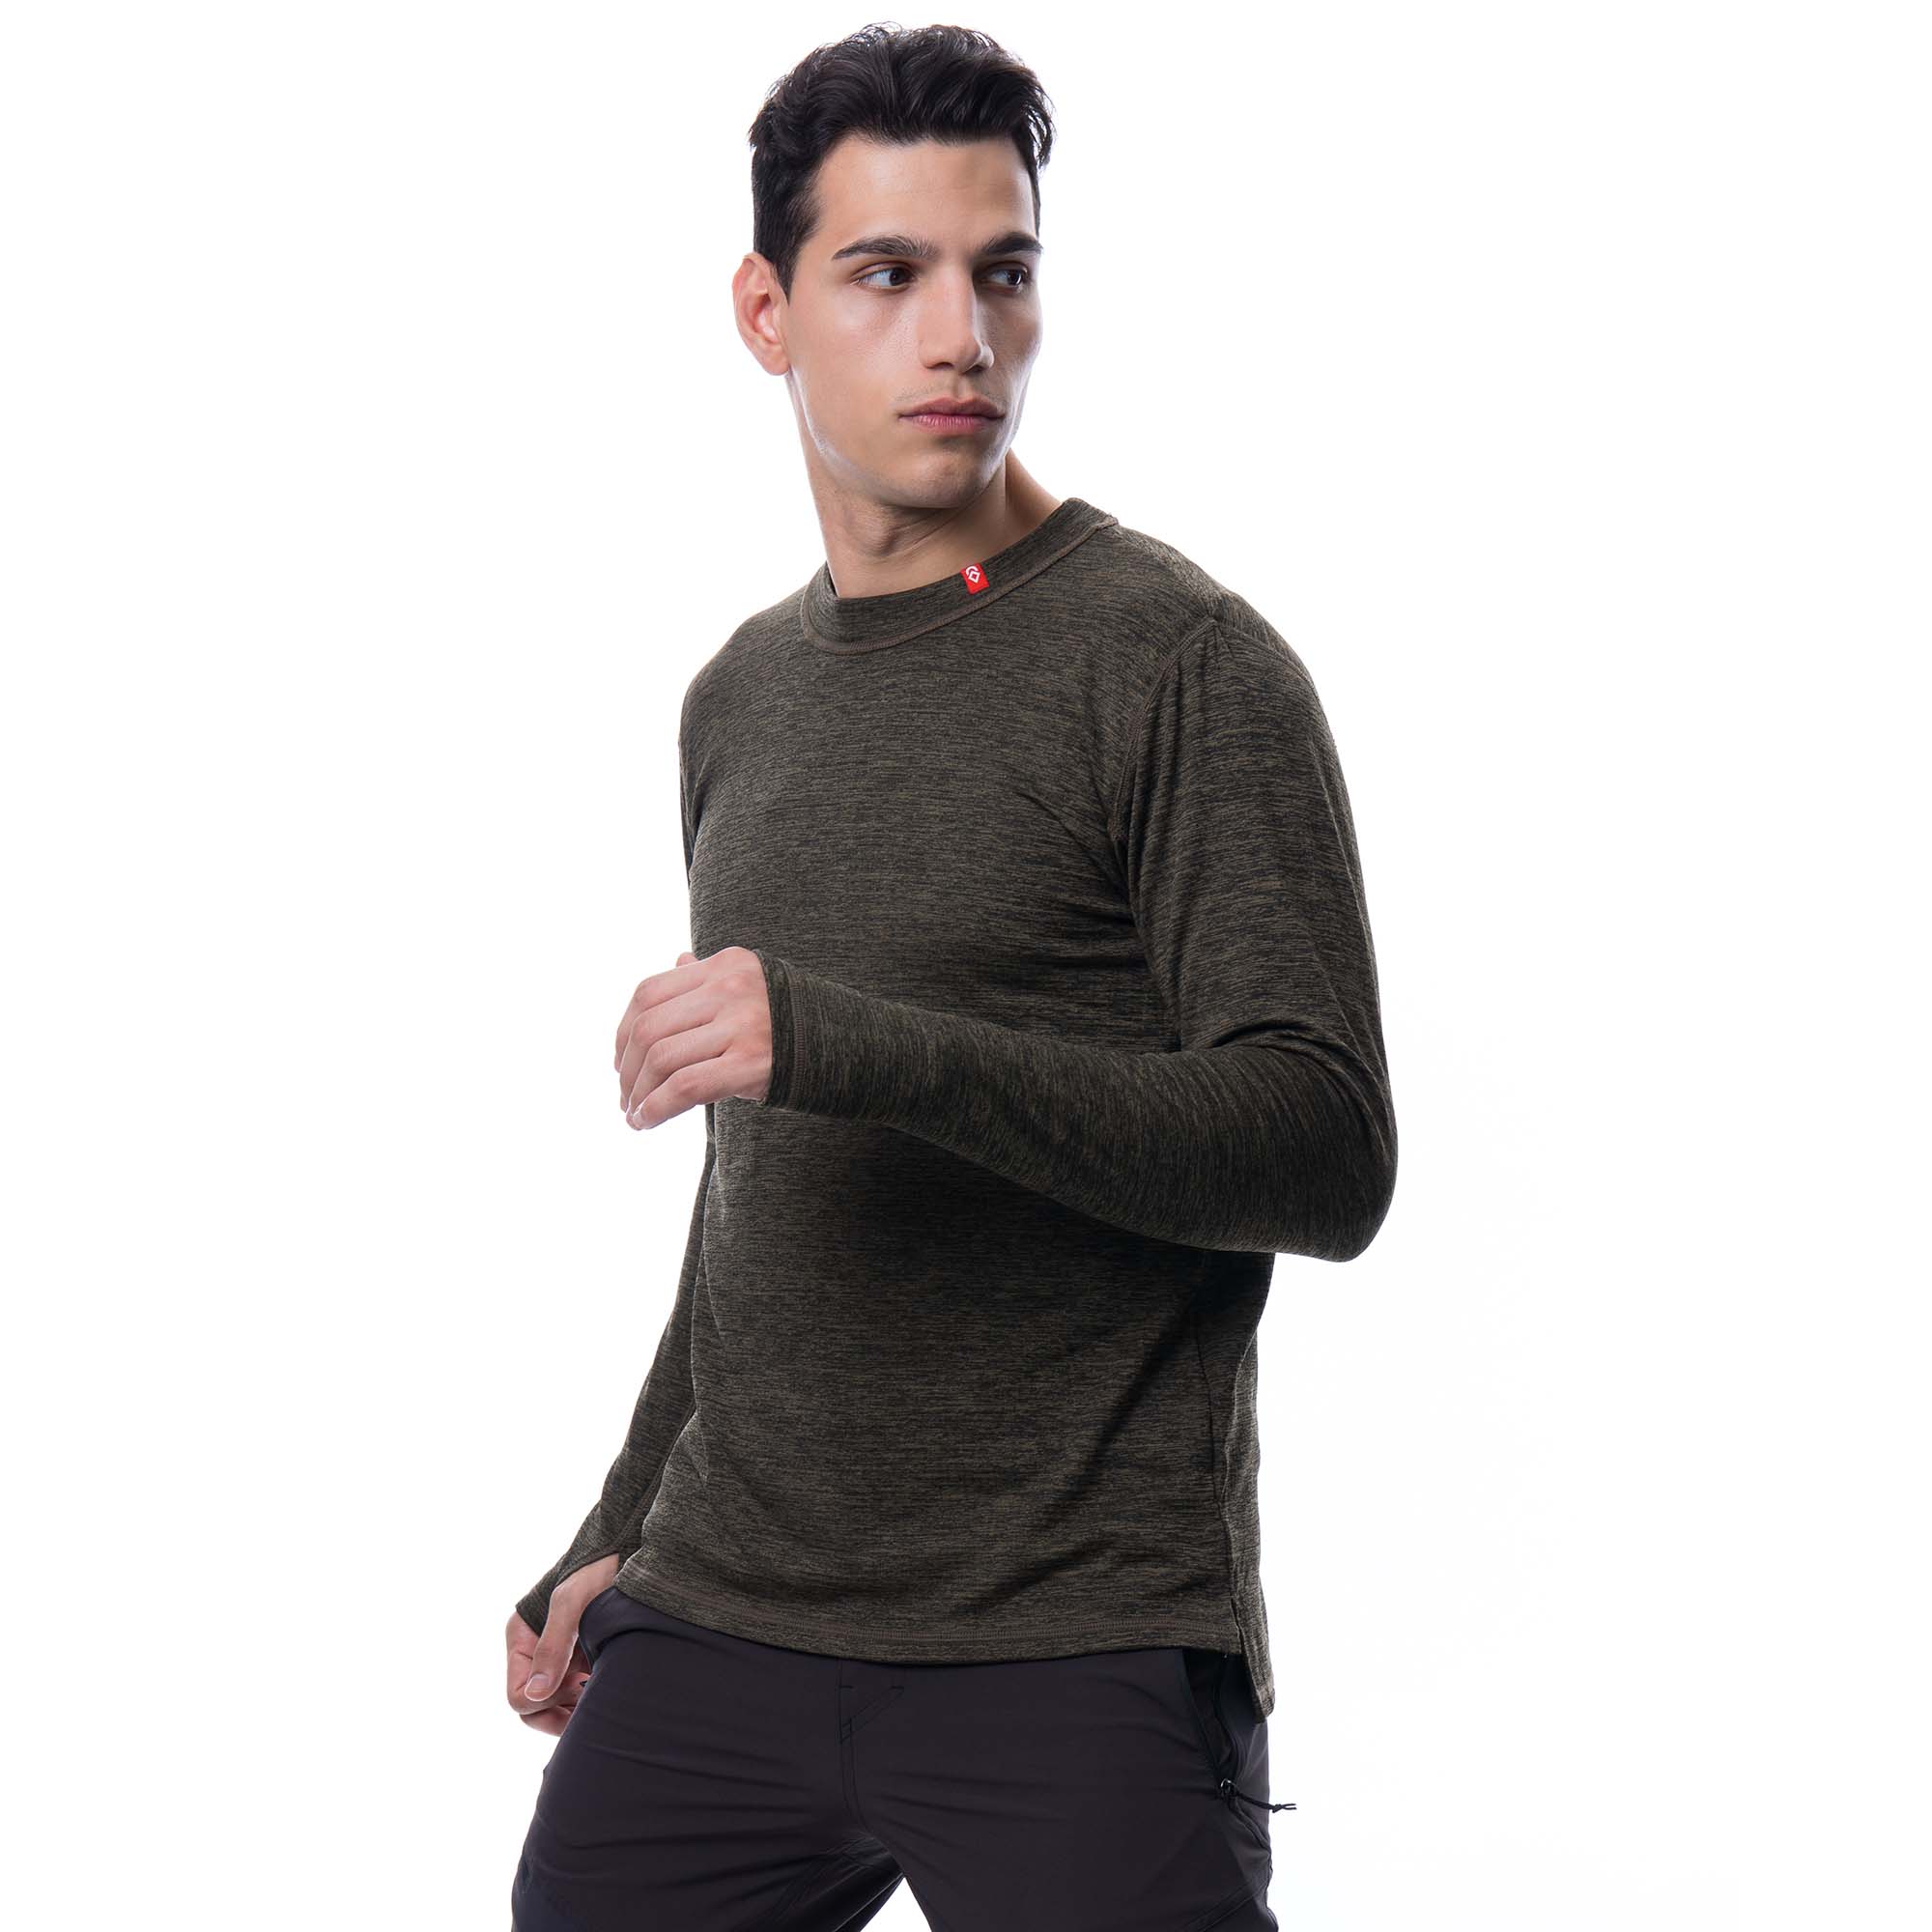 Airhole Waffle Thermal Top